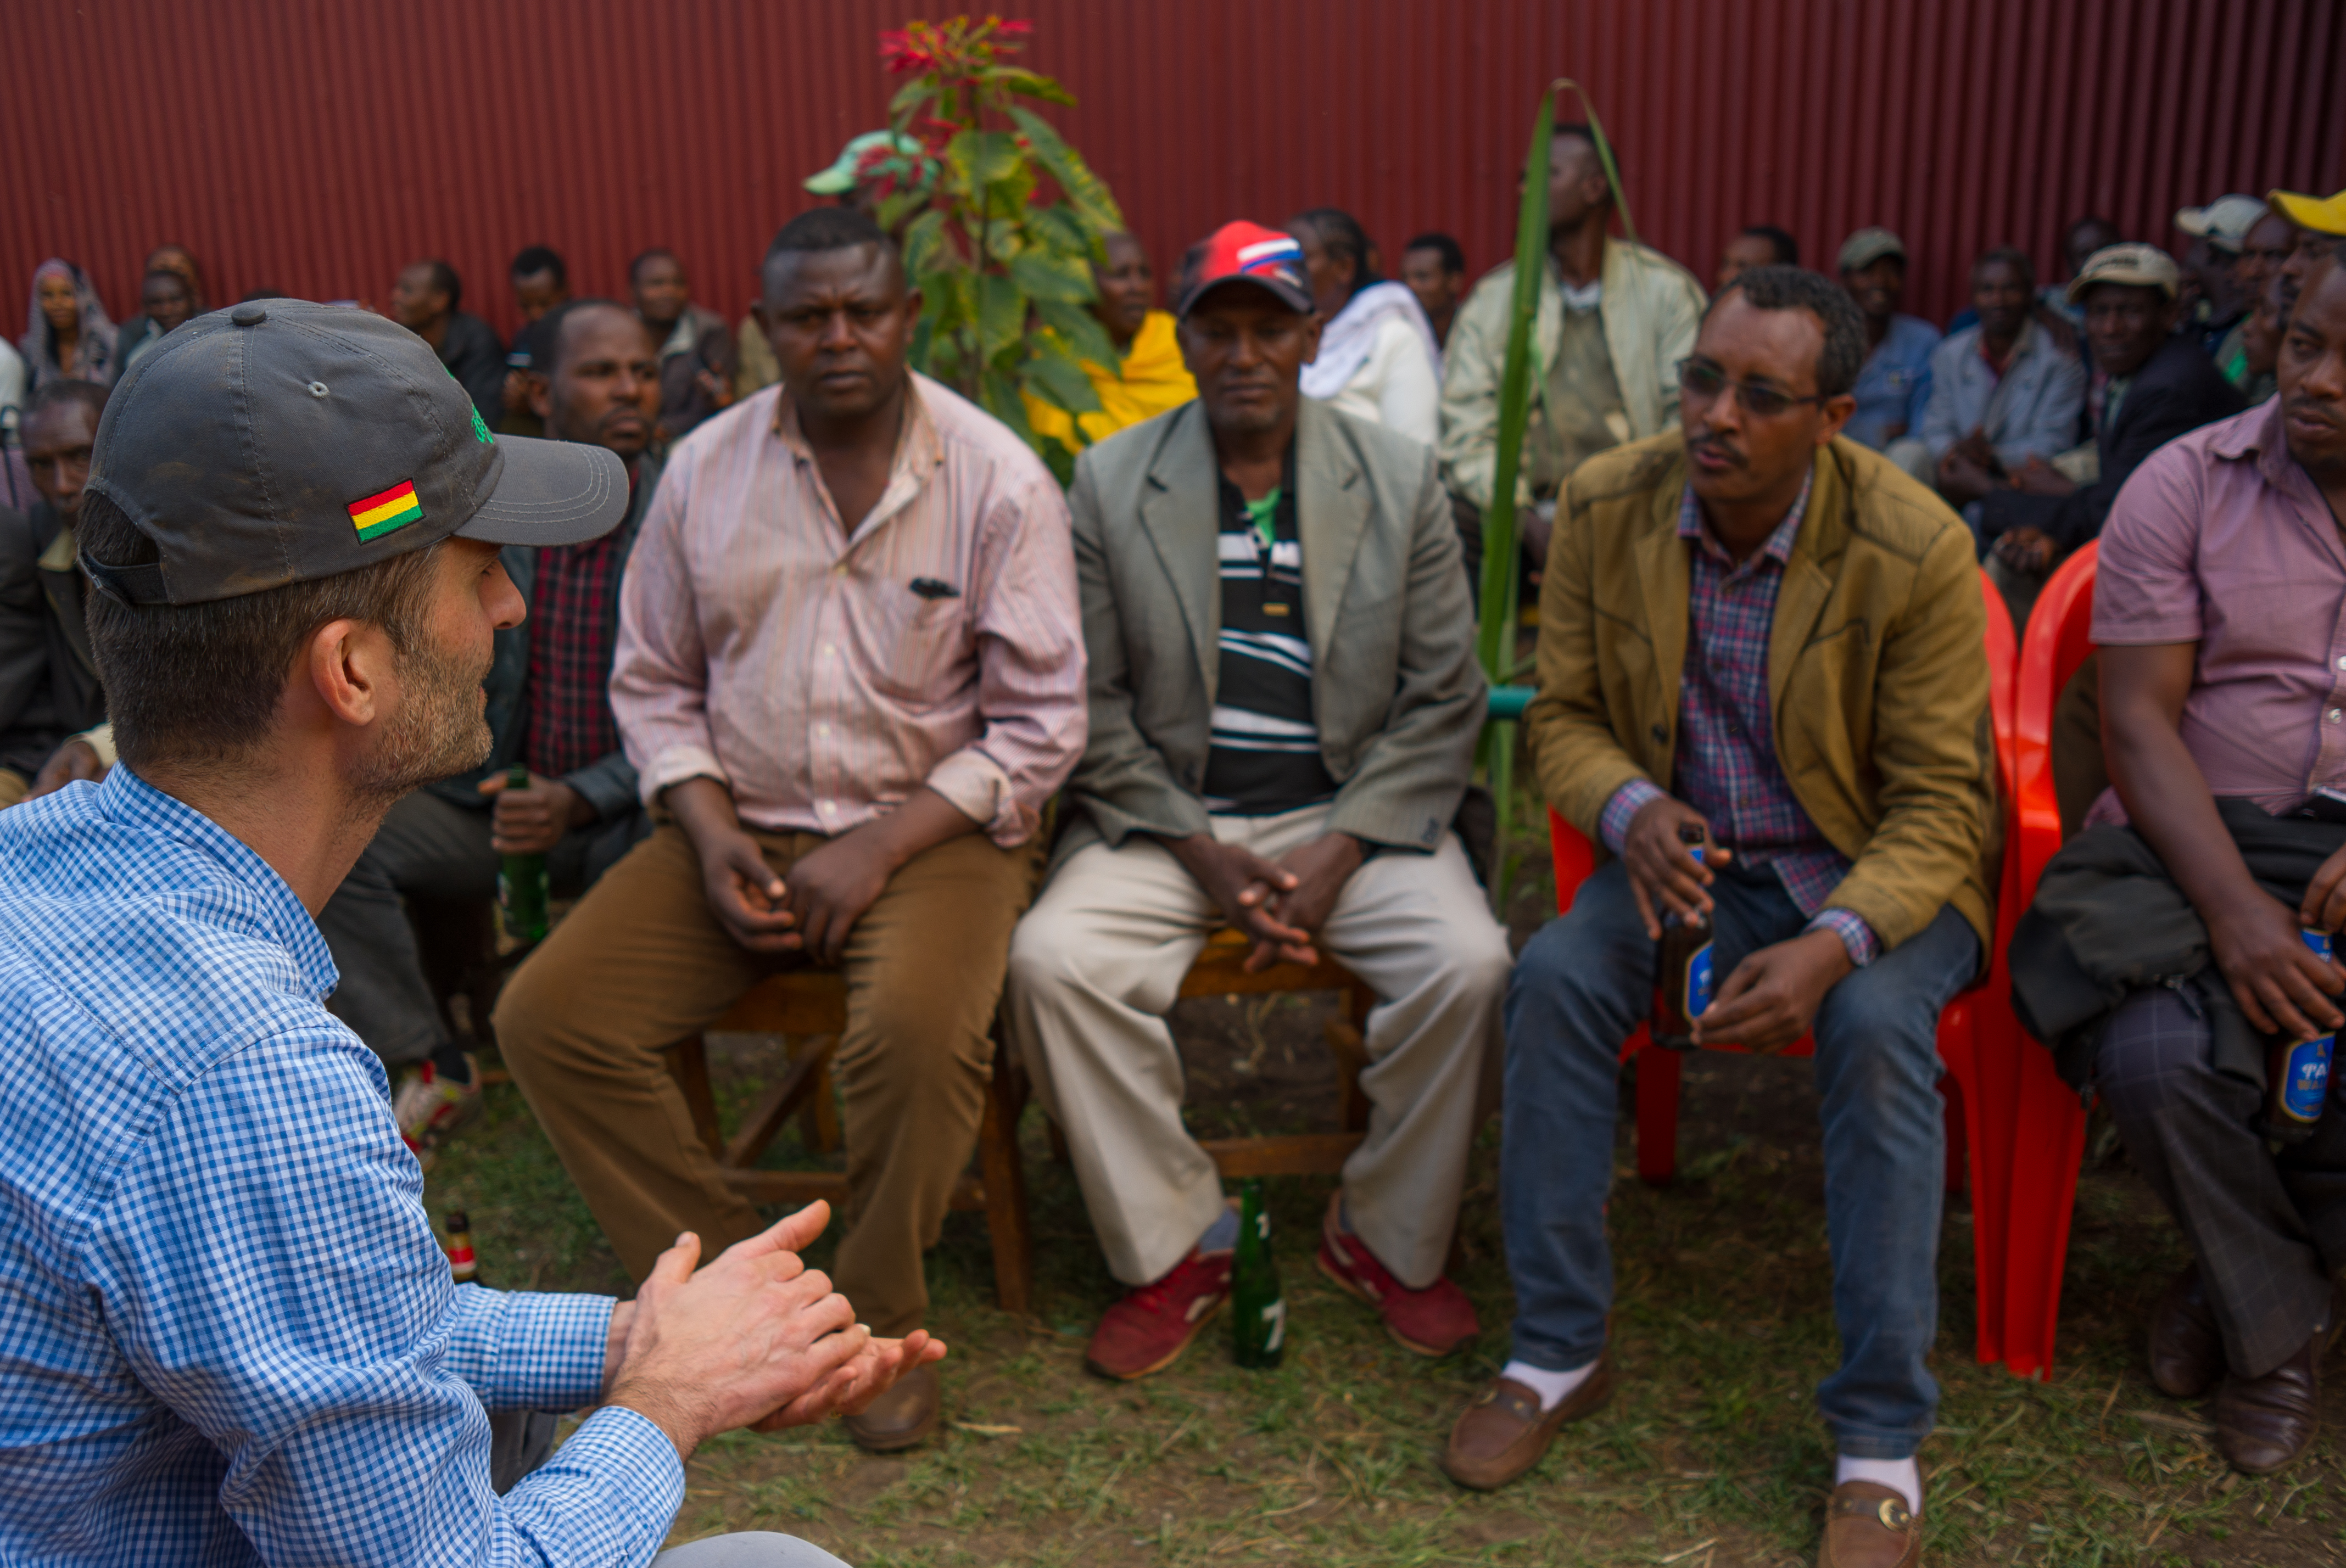 Peter speaking with the farmers